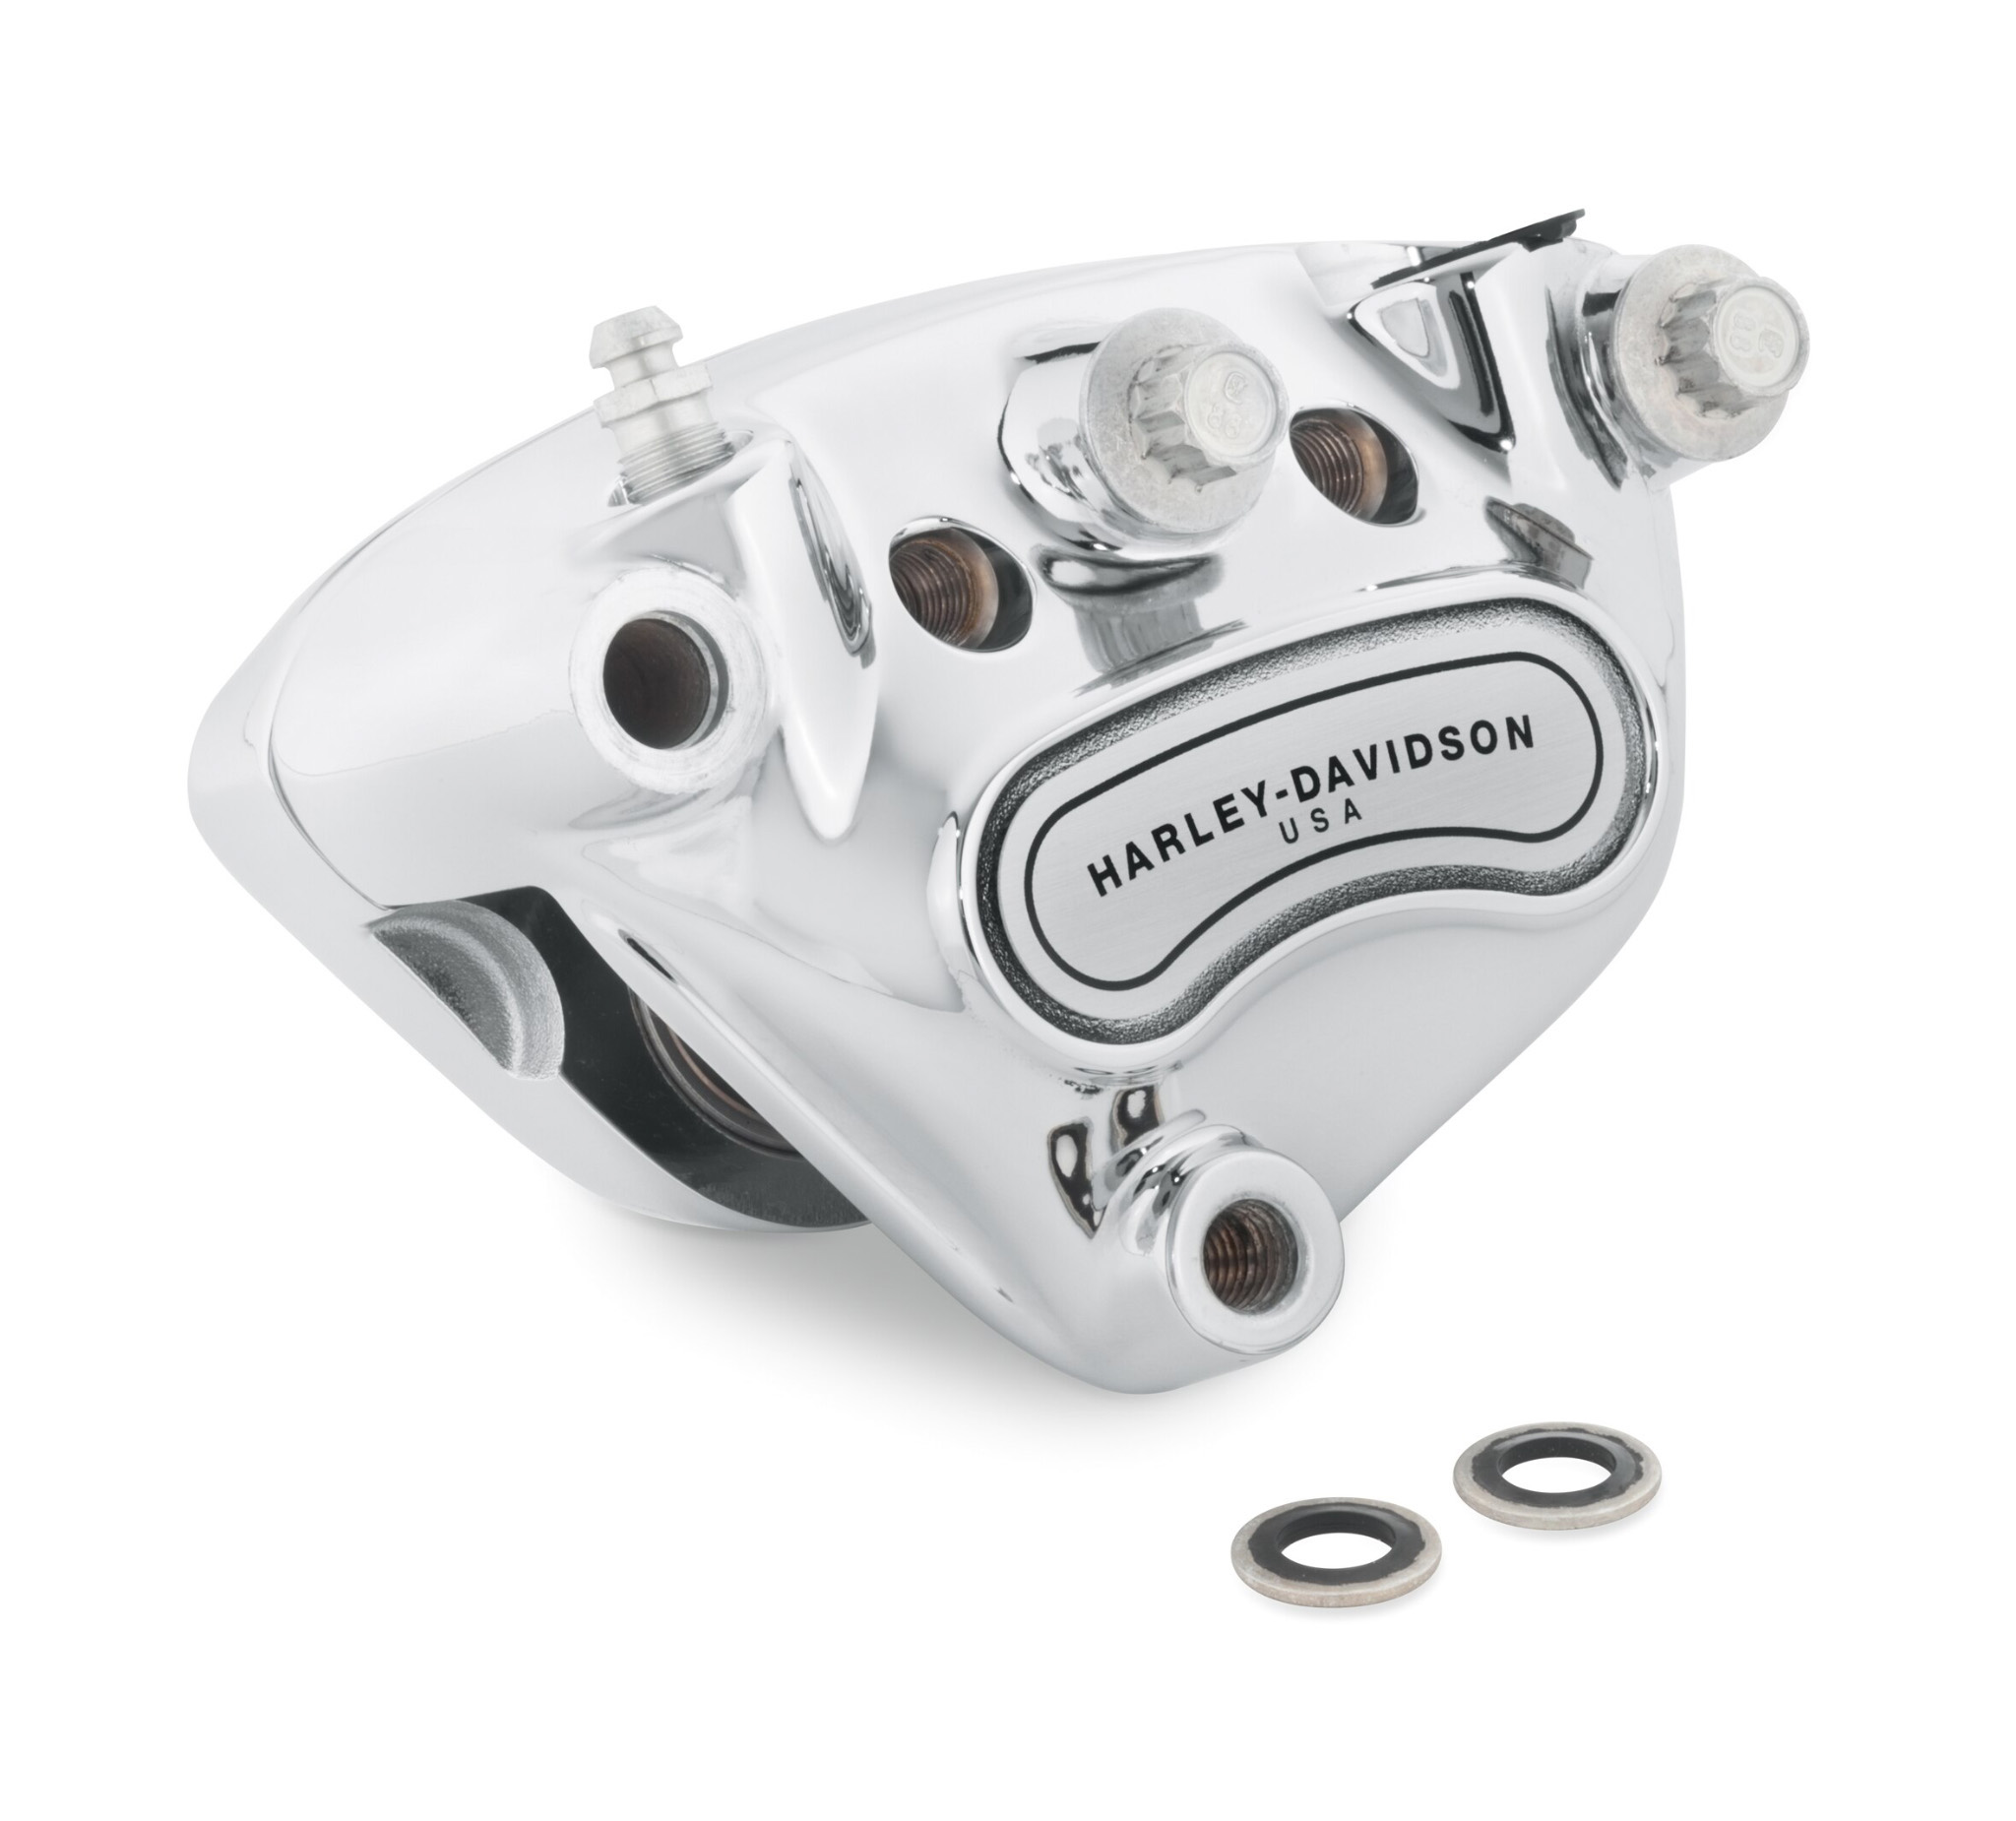 Chrome Front 4 Piston Caliper,for Harley Davidson,by V-Twin